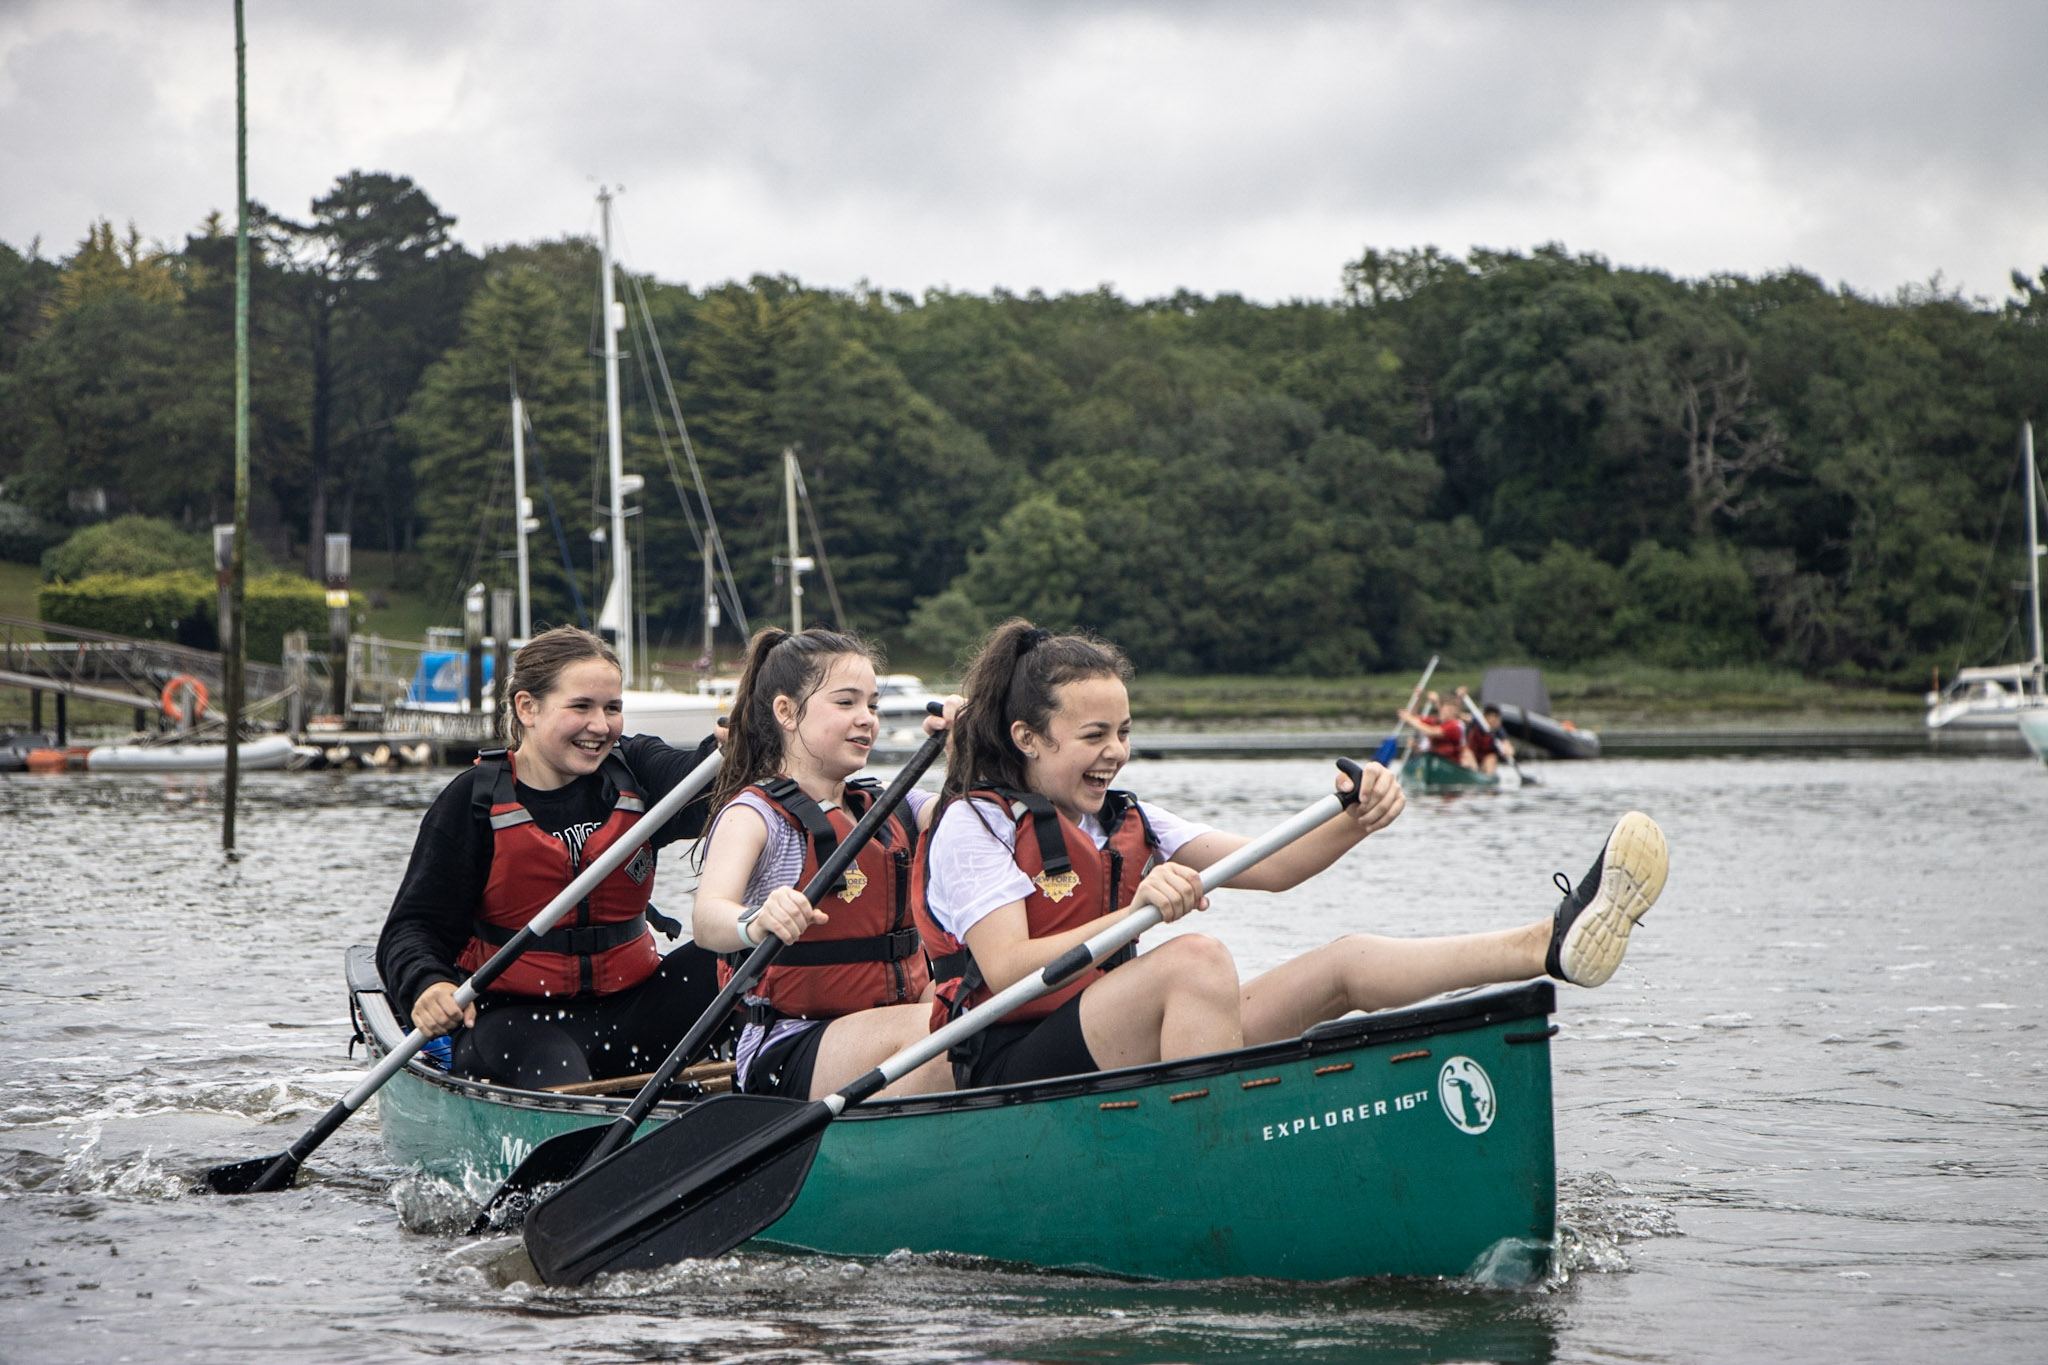 Youth activities include canoeing on the Beaulieu River.